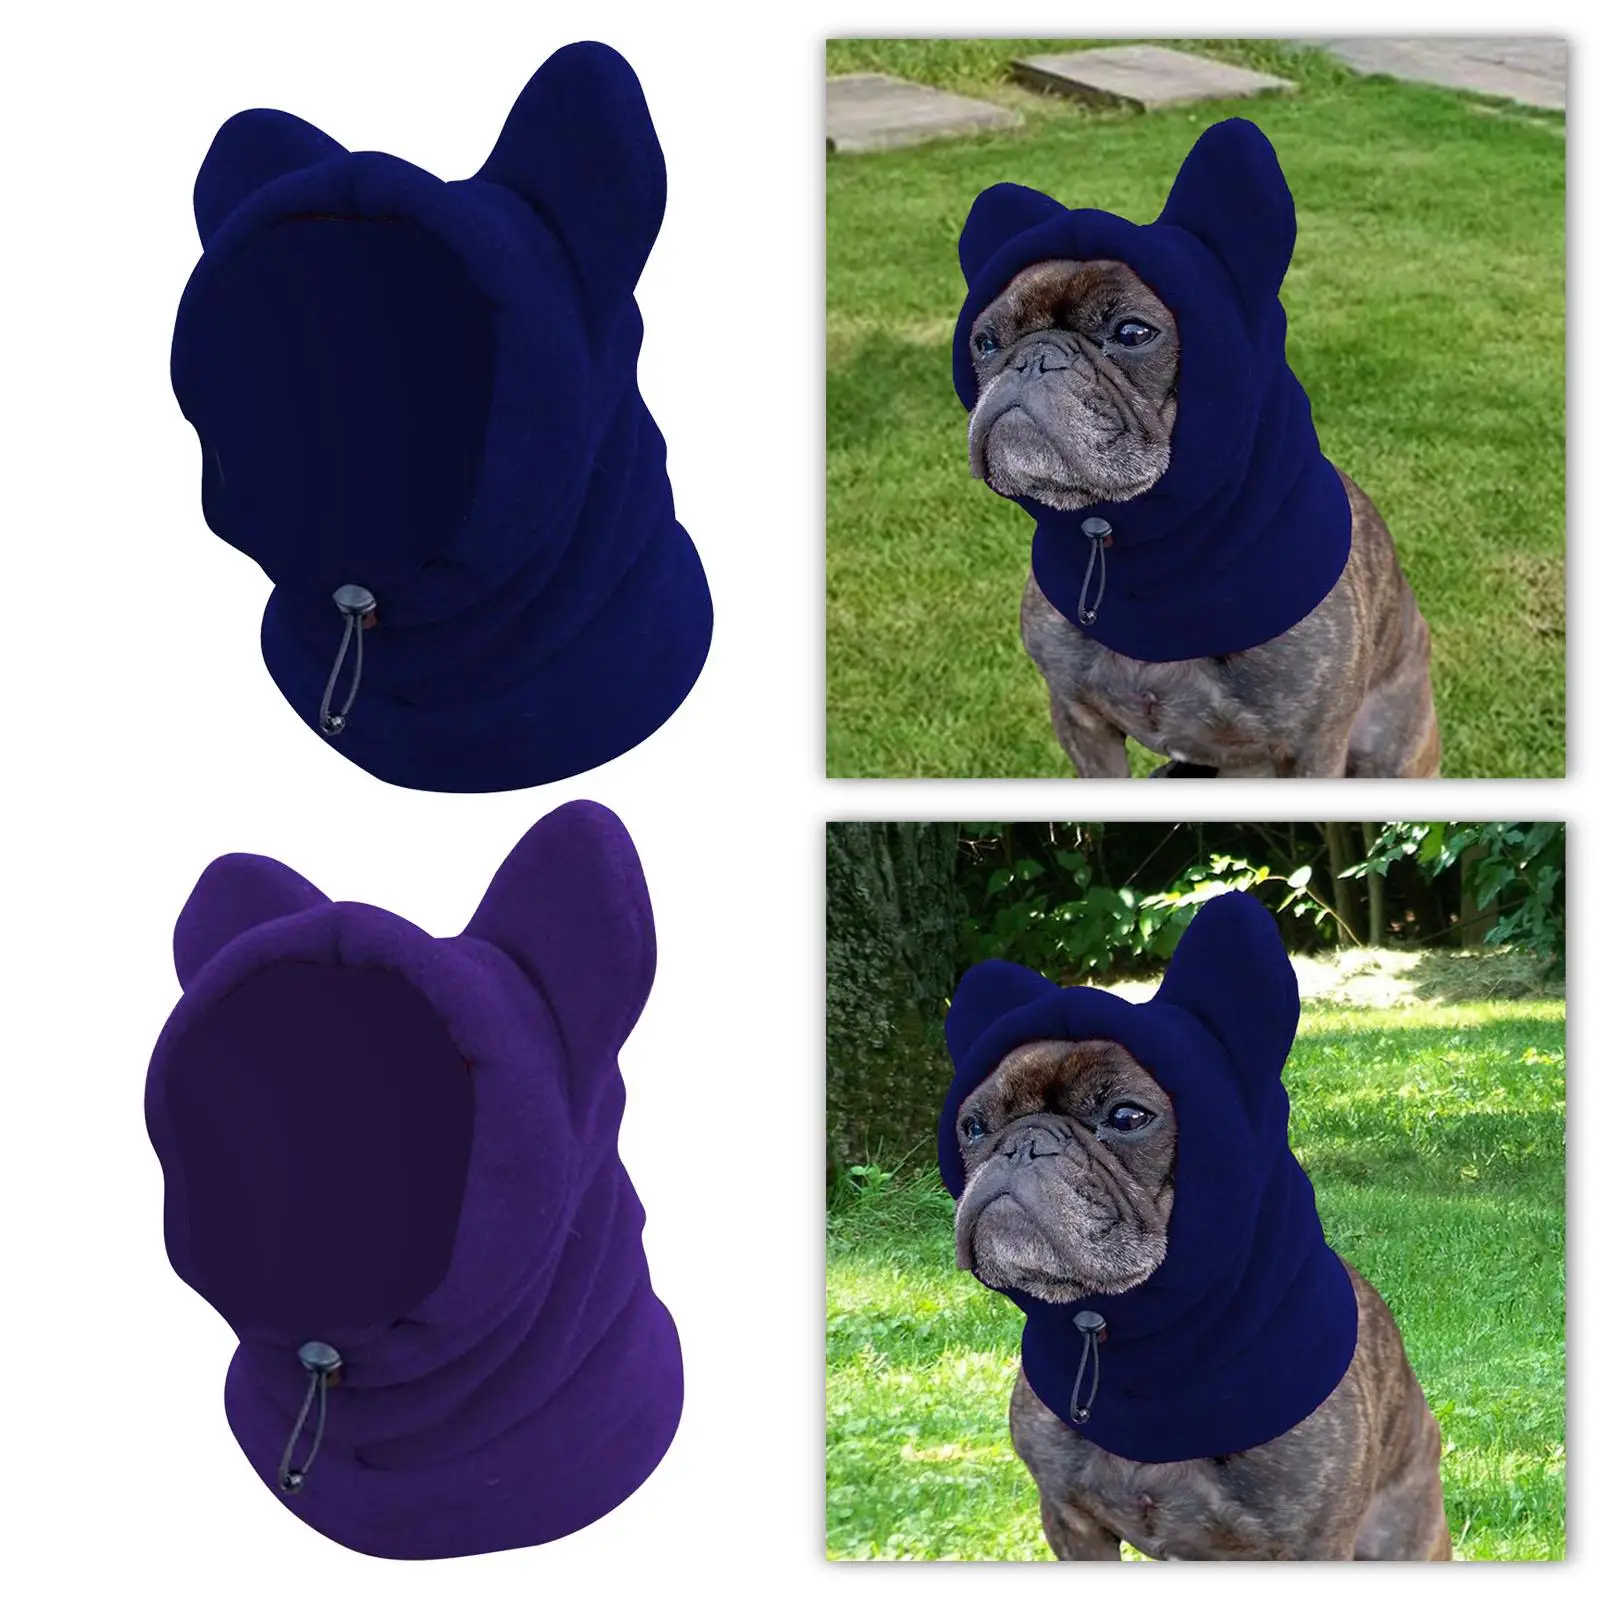 Dog Hood Warm Hat Winter Pet Hat Soft Walking Thickened Ears Hoodie Dog Ears Cover for Cat Small, Medium, Large Dogs Hiking